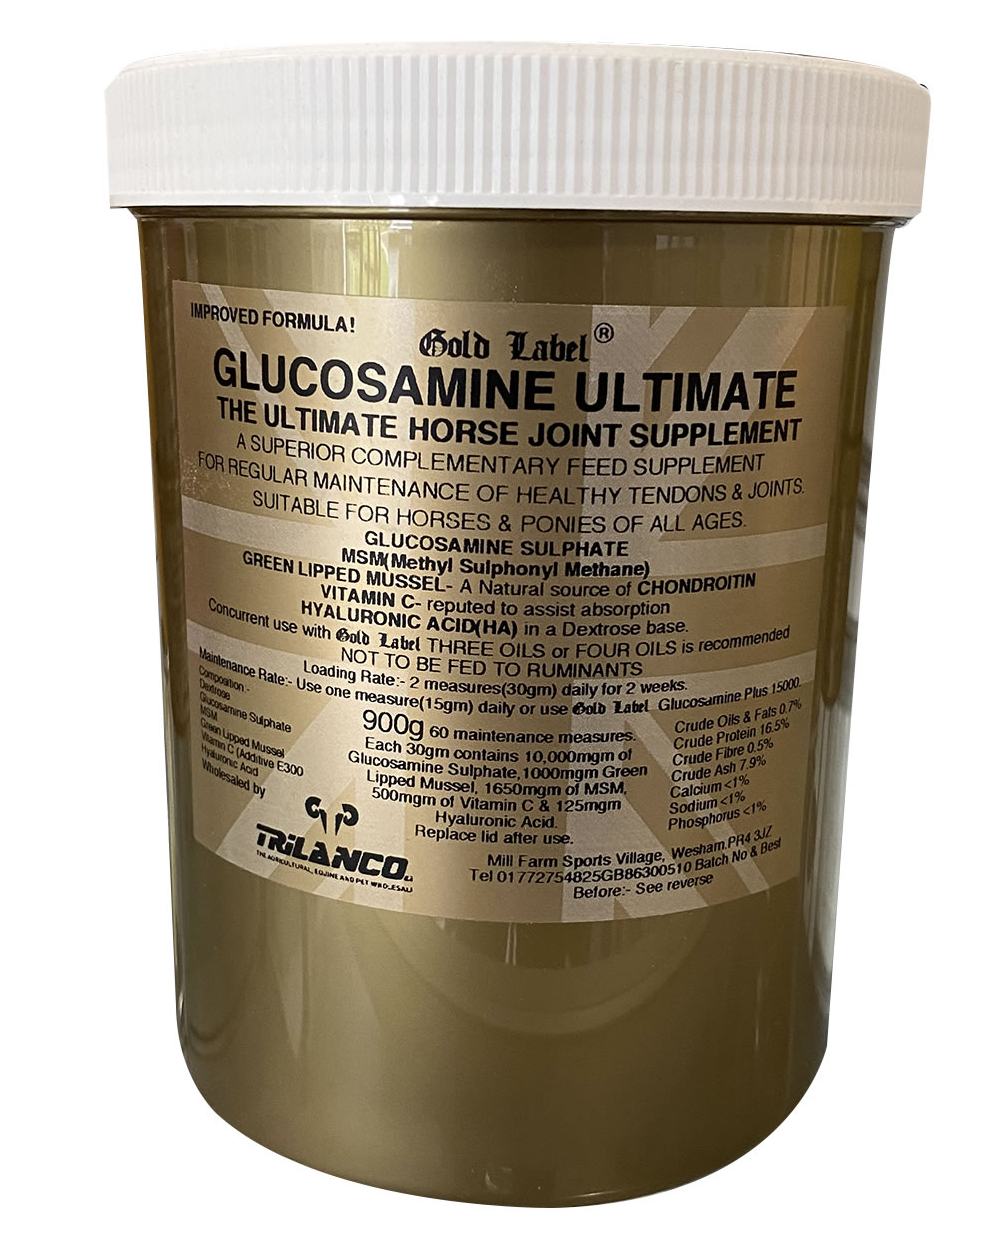 Gold Label Glucosamine Ultimate On A White Background